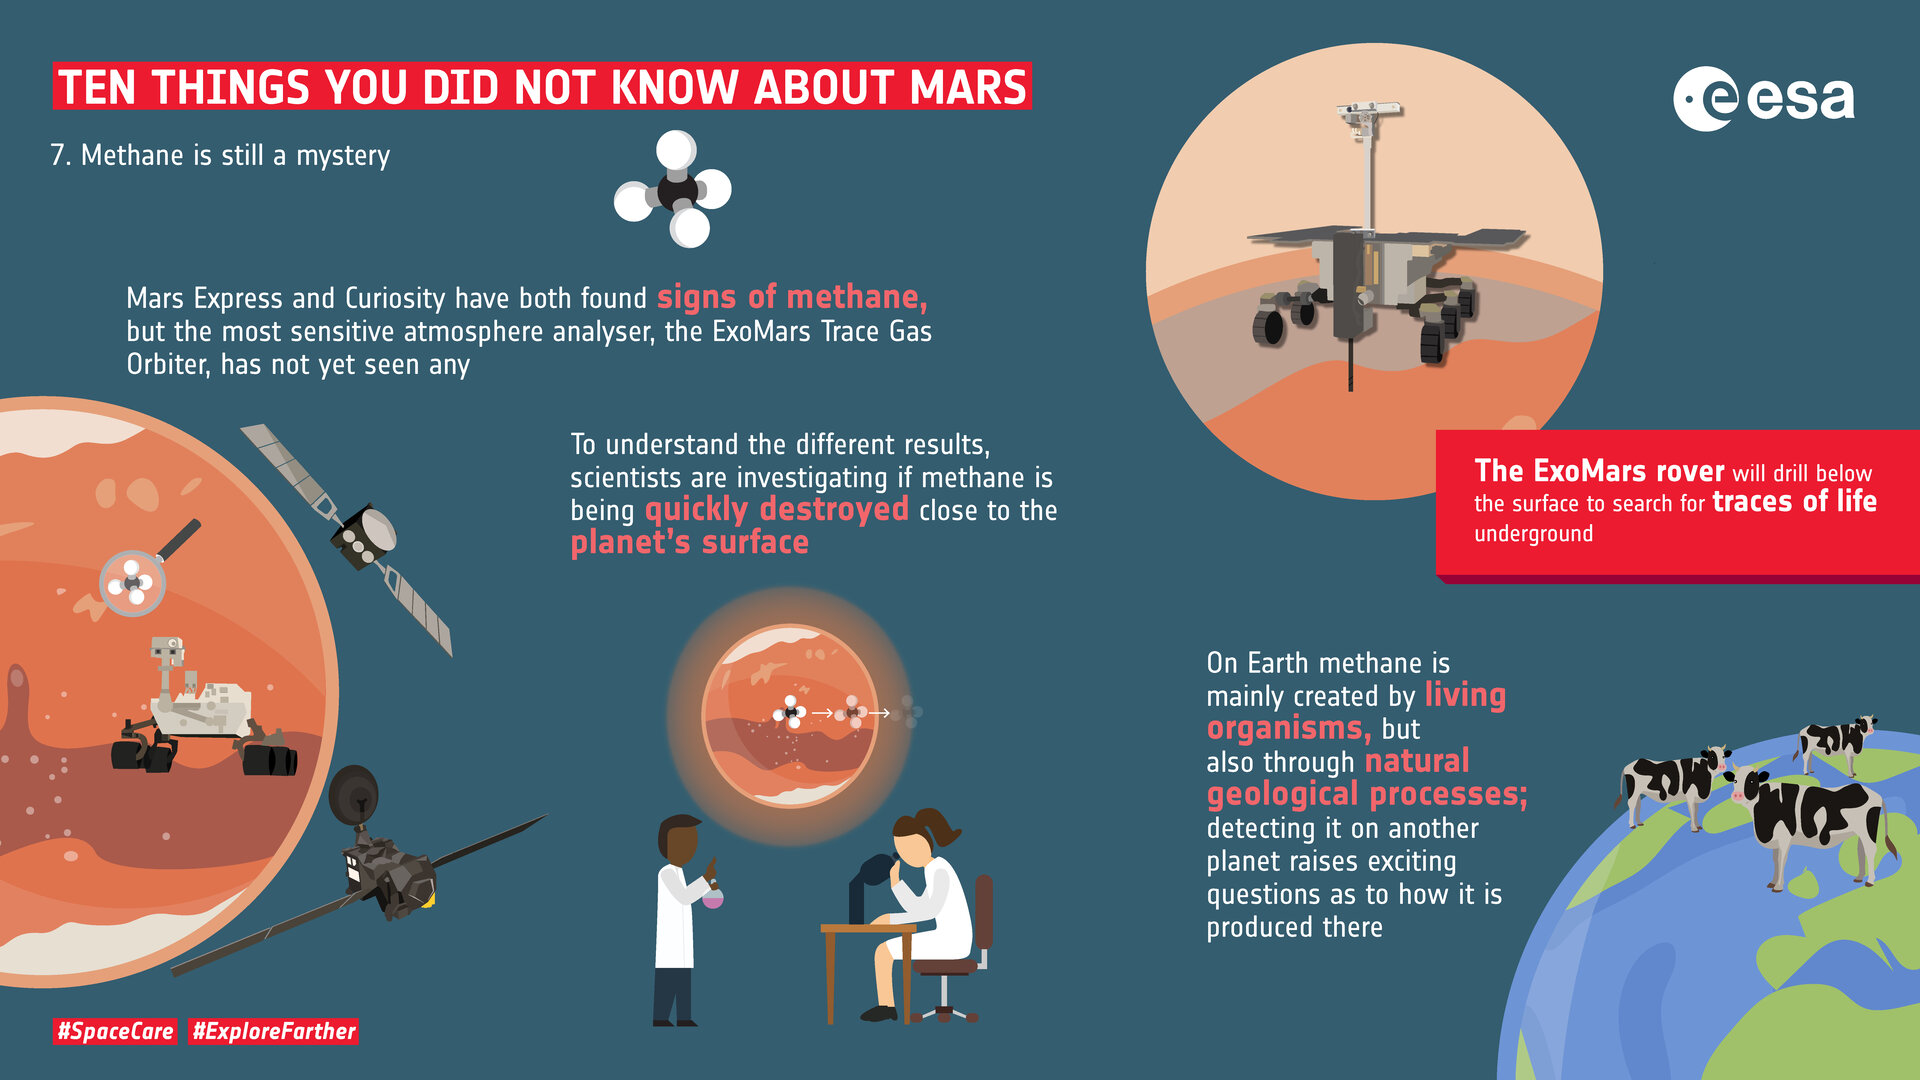 Ten things you did not know about Mars: 7. Methane 